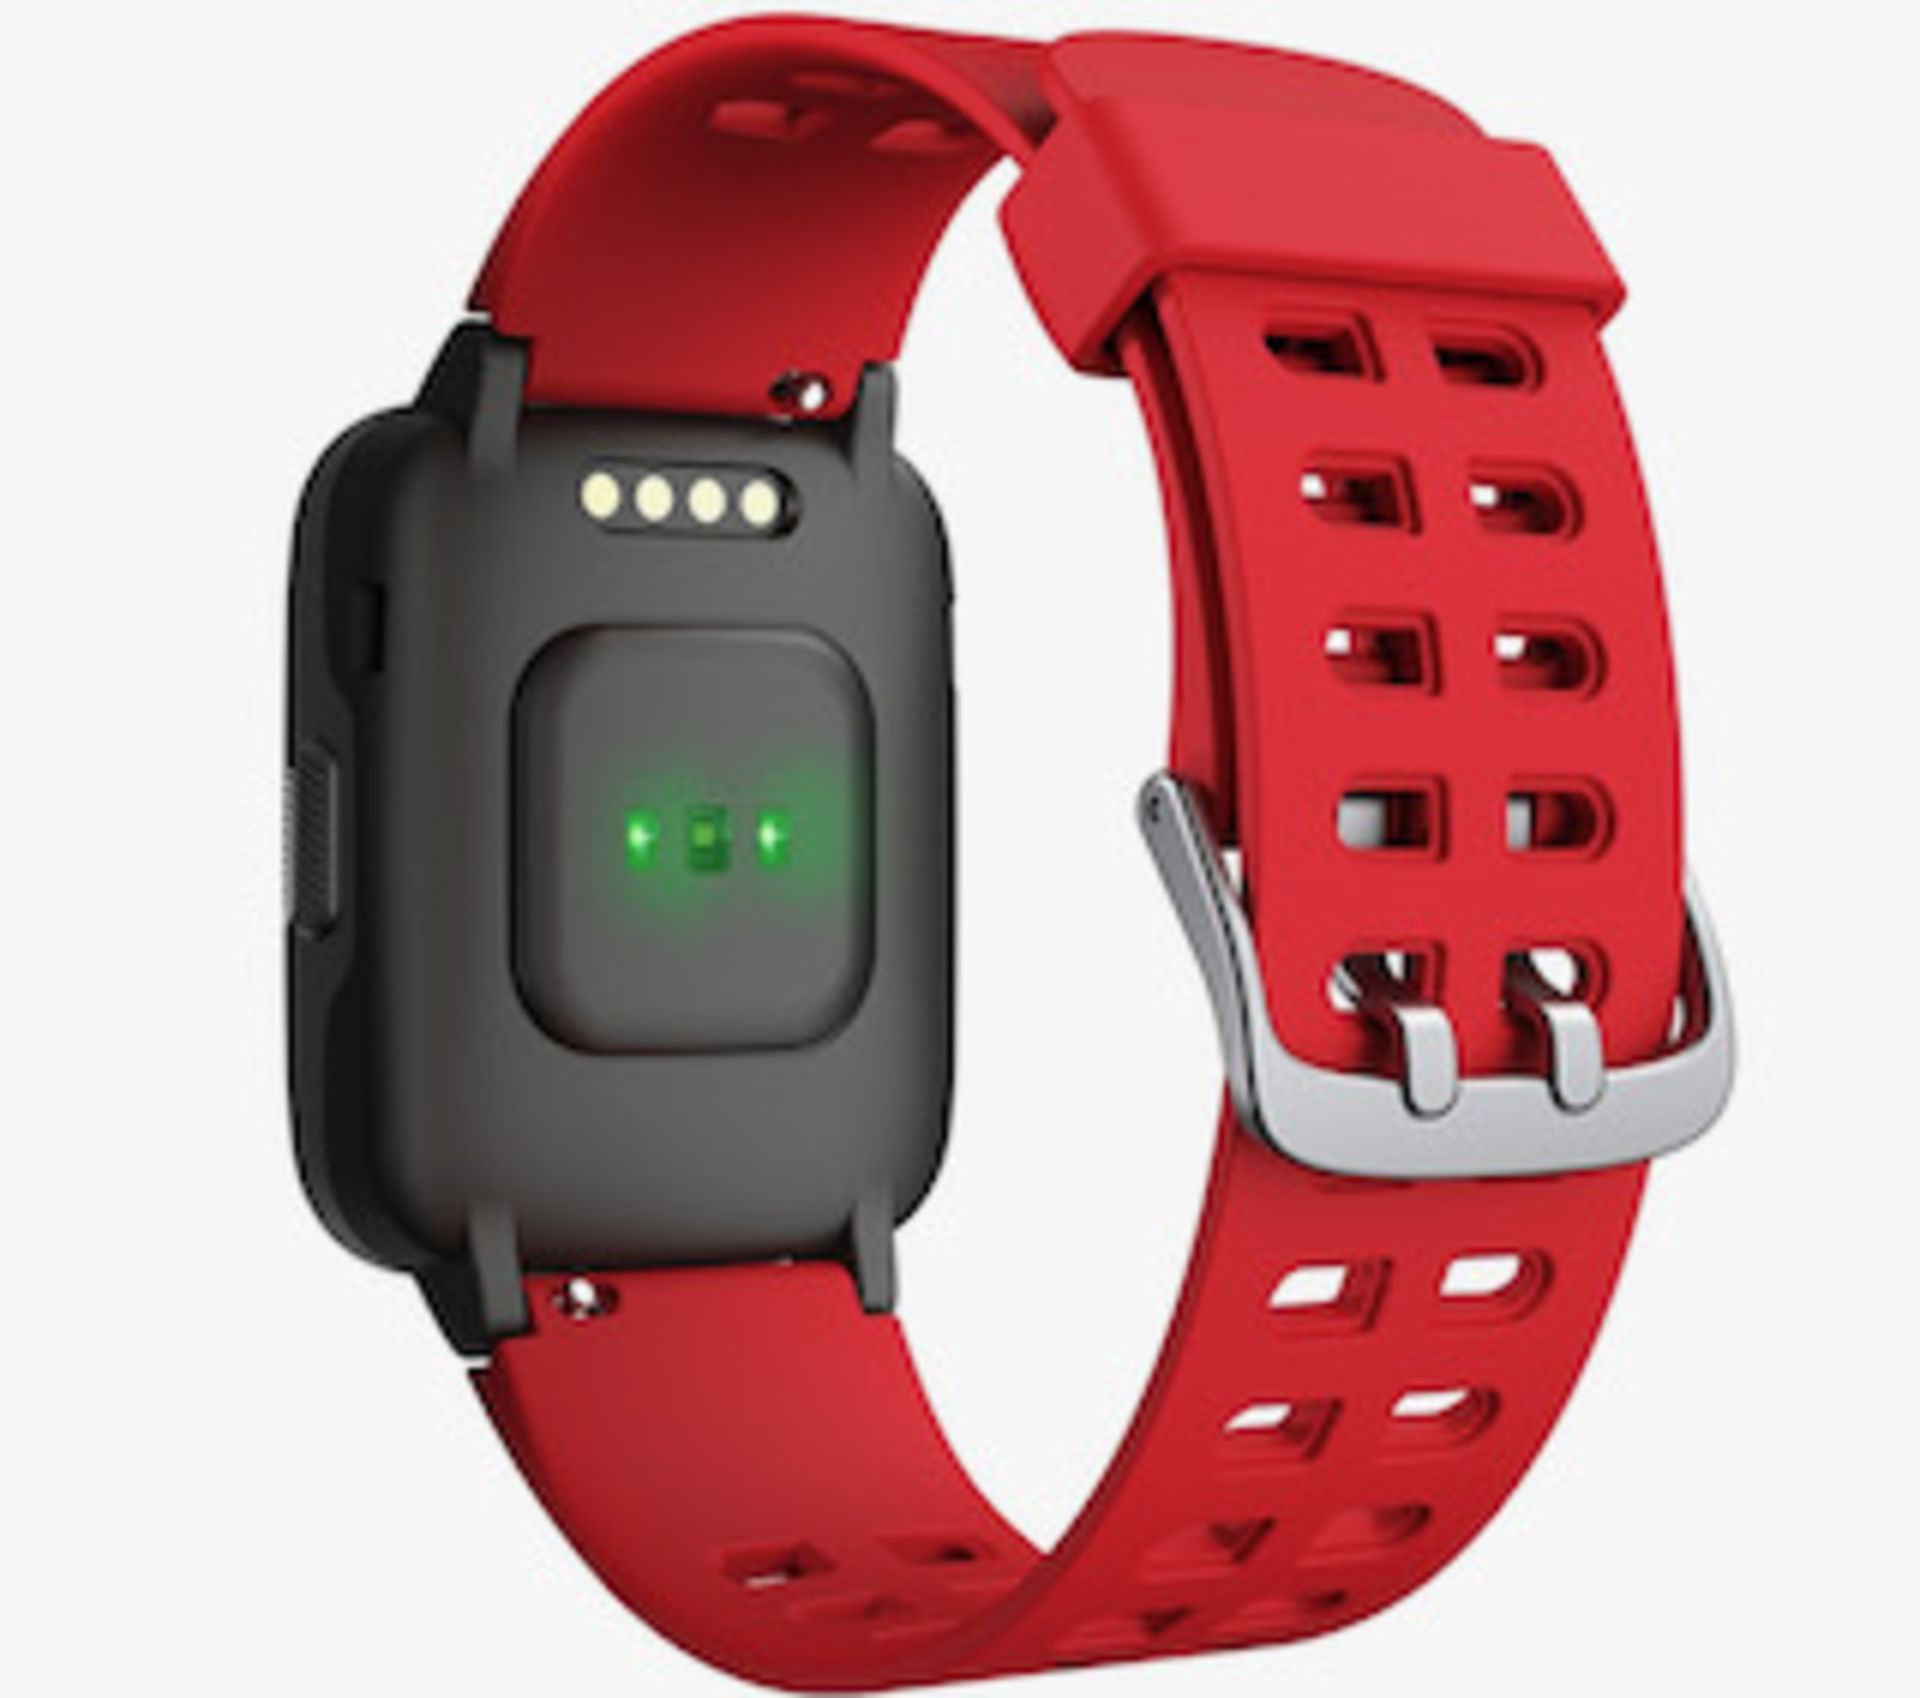 Brand New Unisex Fitness Tracker Watch Id205 Red Strap About This Item 1.3-Inch LCD Colour - Image 16 of 34